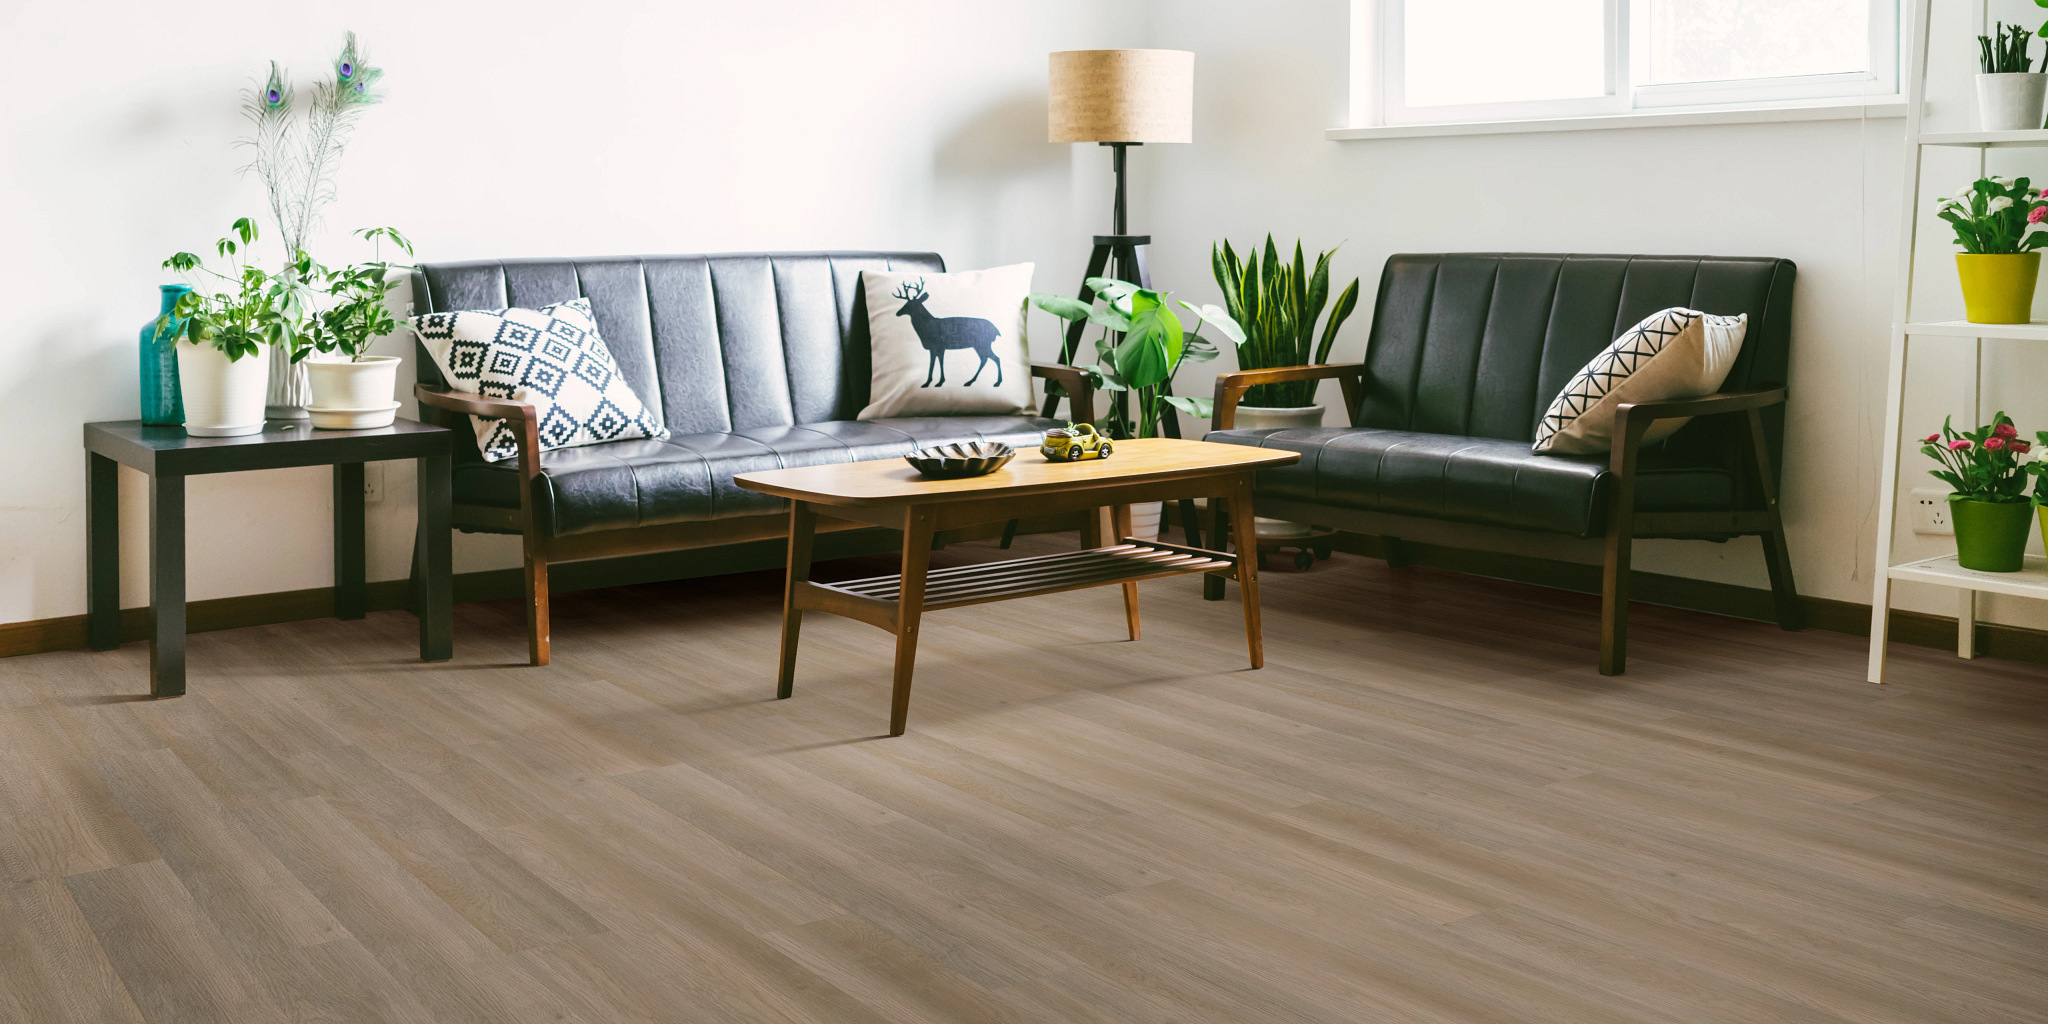 Cawood Flooring Systems Home, Hardwood Flooring West Chester Ohio